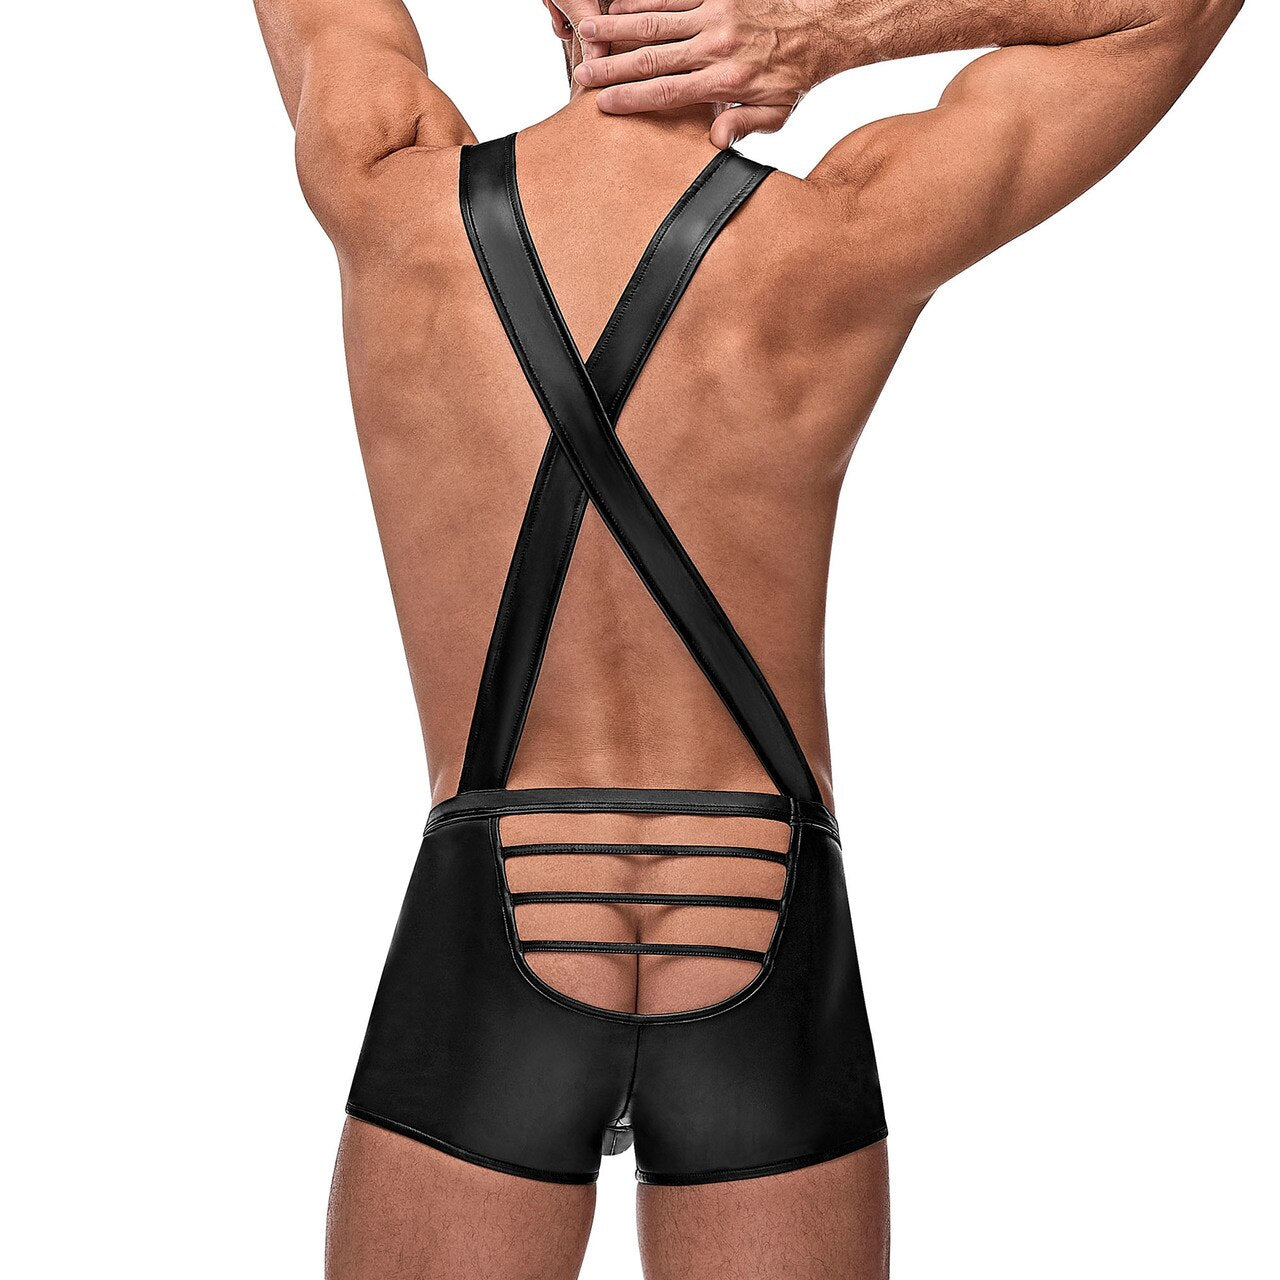 Mens Male Power Matt Wetlook Sling Shorts with Strapped Cutouts Black